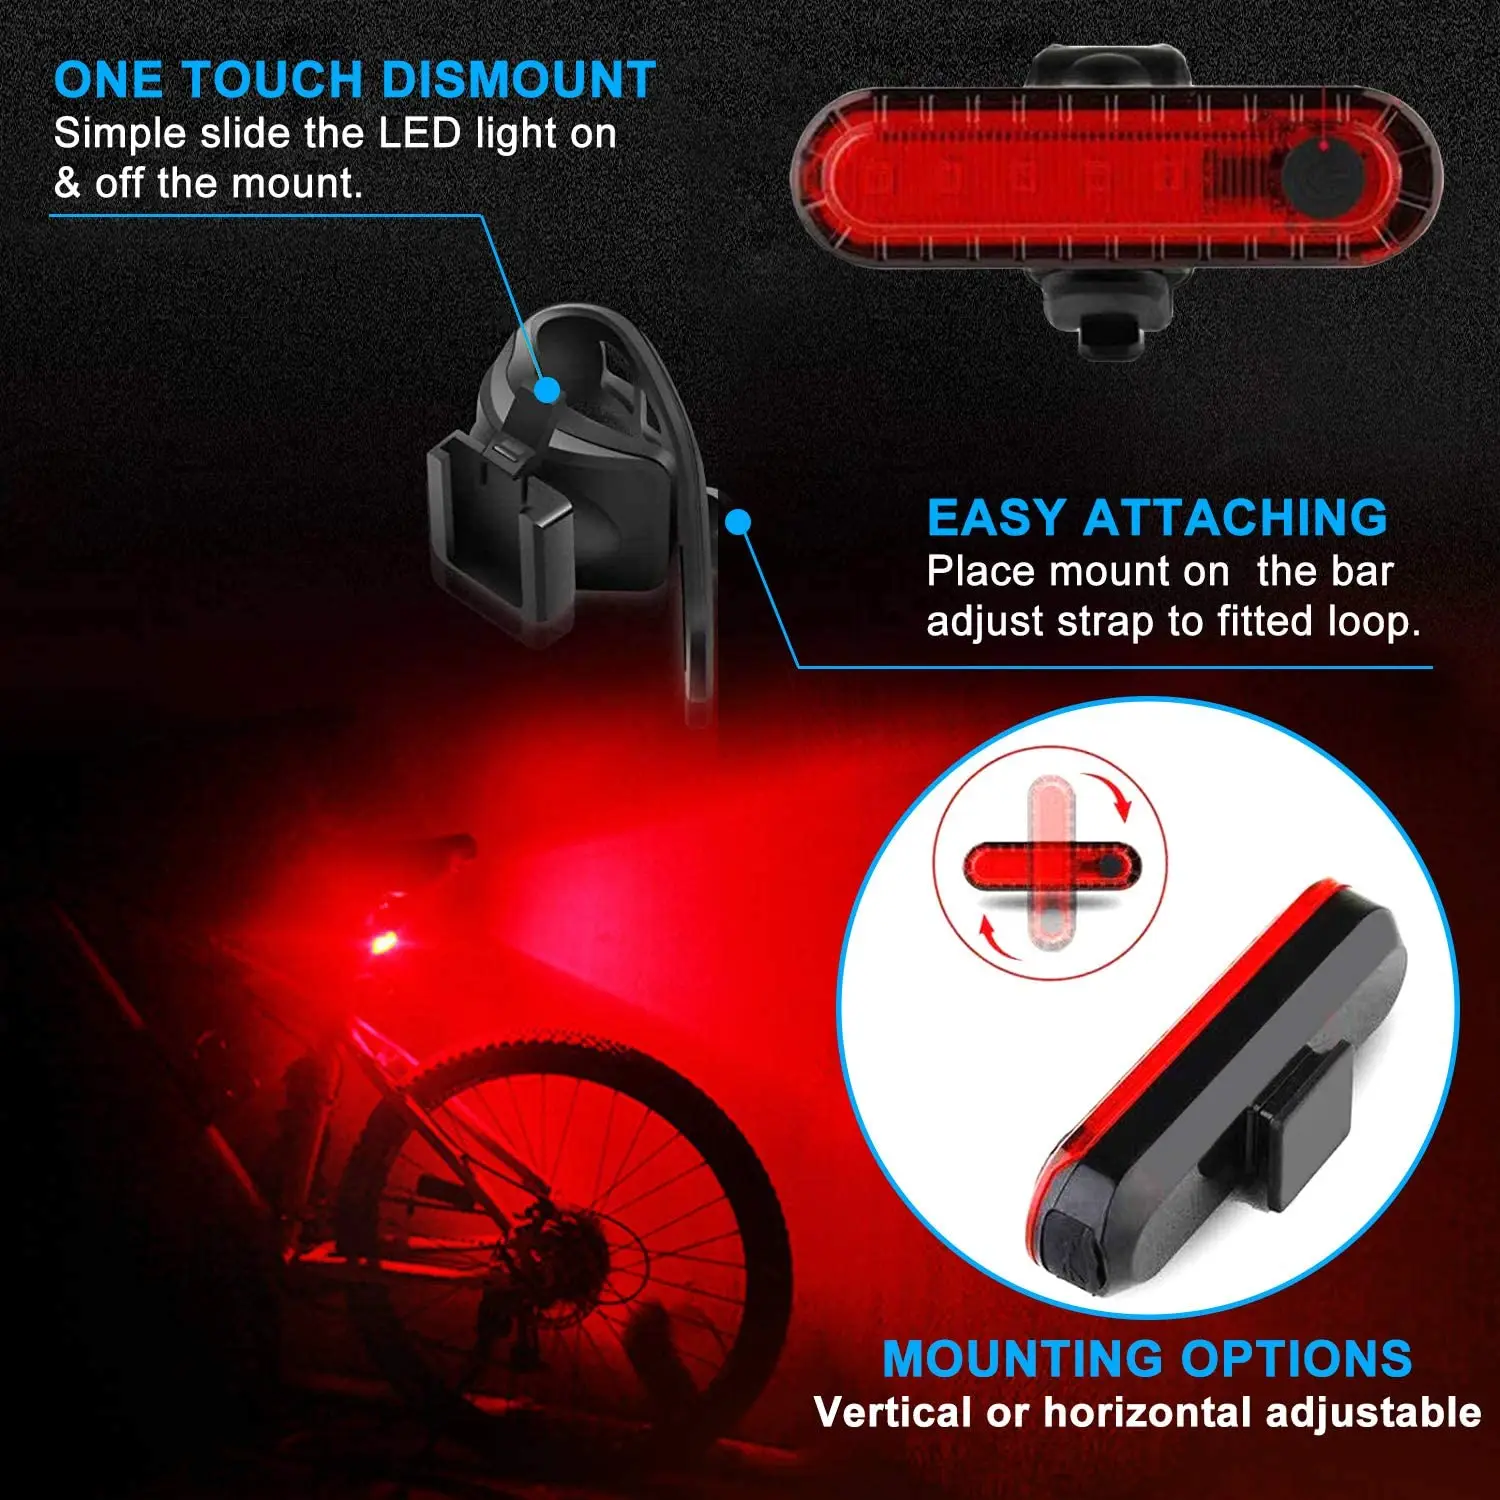 Bicycle Lights USB Front and Rear Rechargeable Bicycle Headlight Tail Lights Alarm Belling Waterproof 3 in 1 Battery ABS Plastic